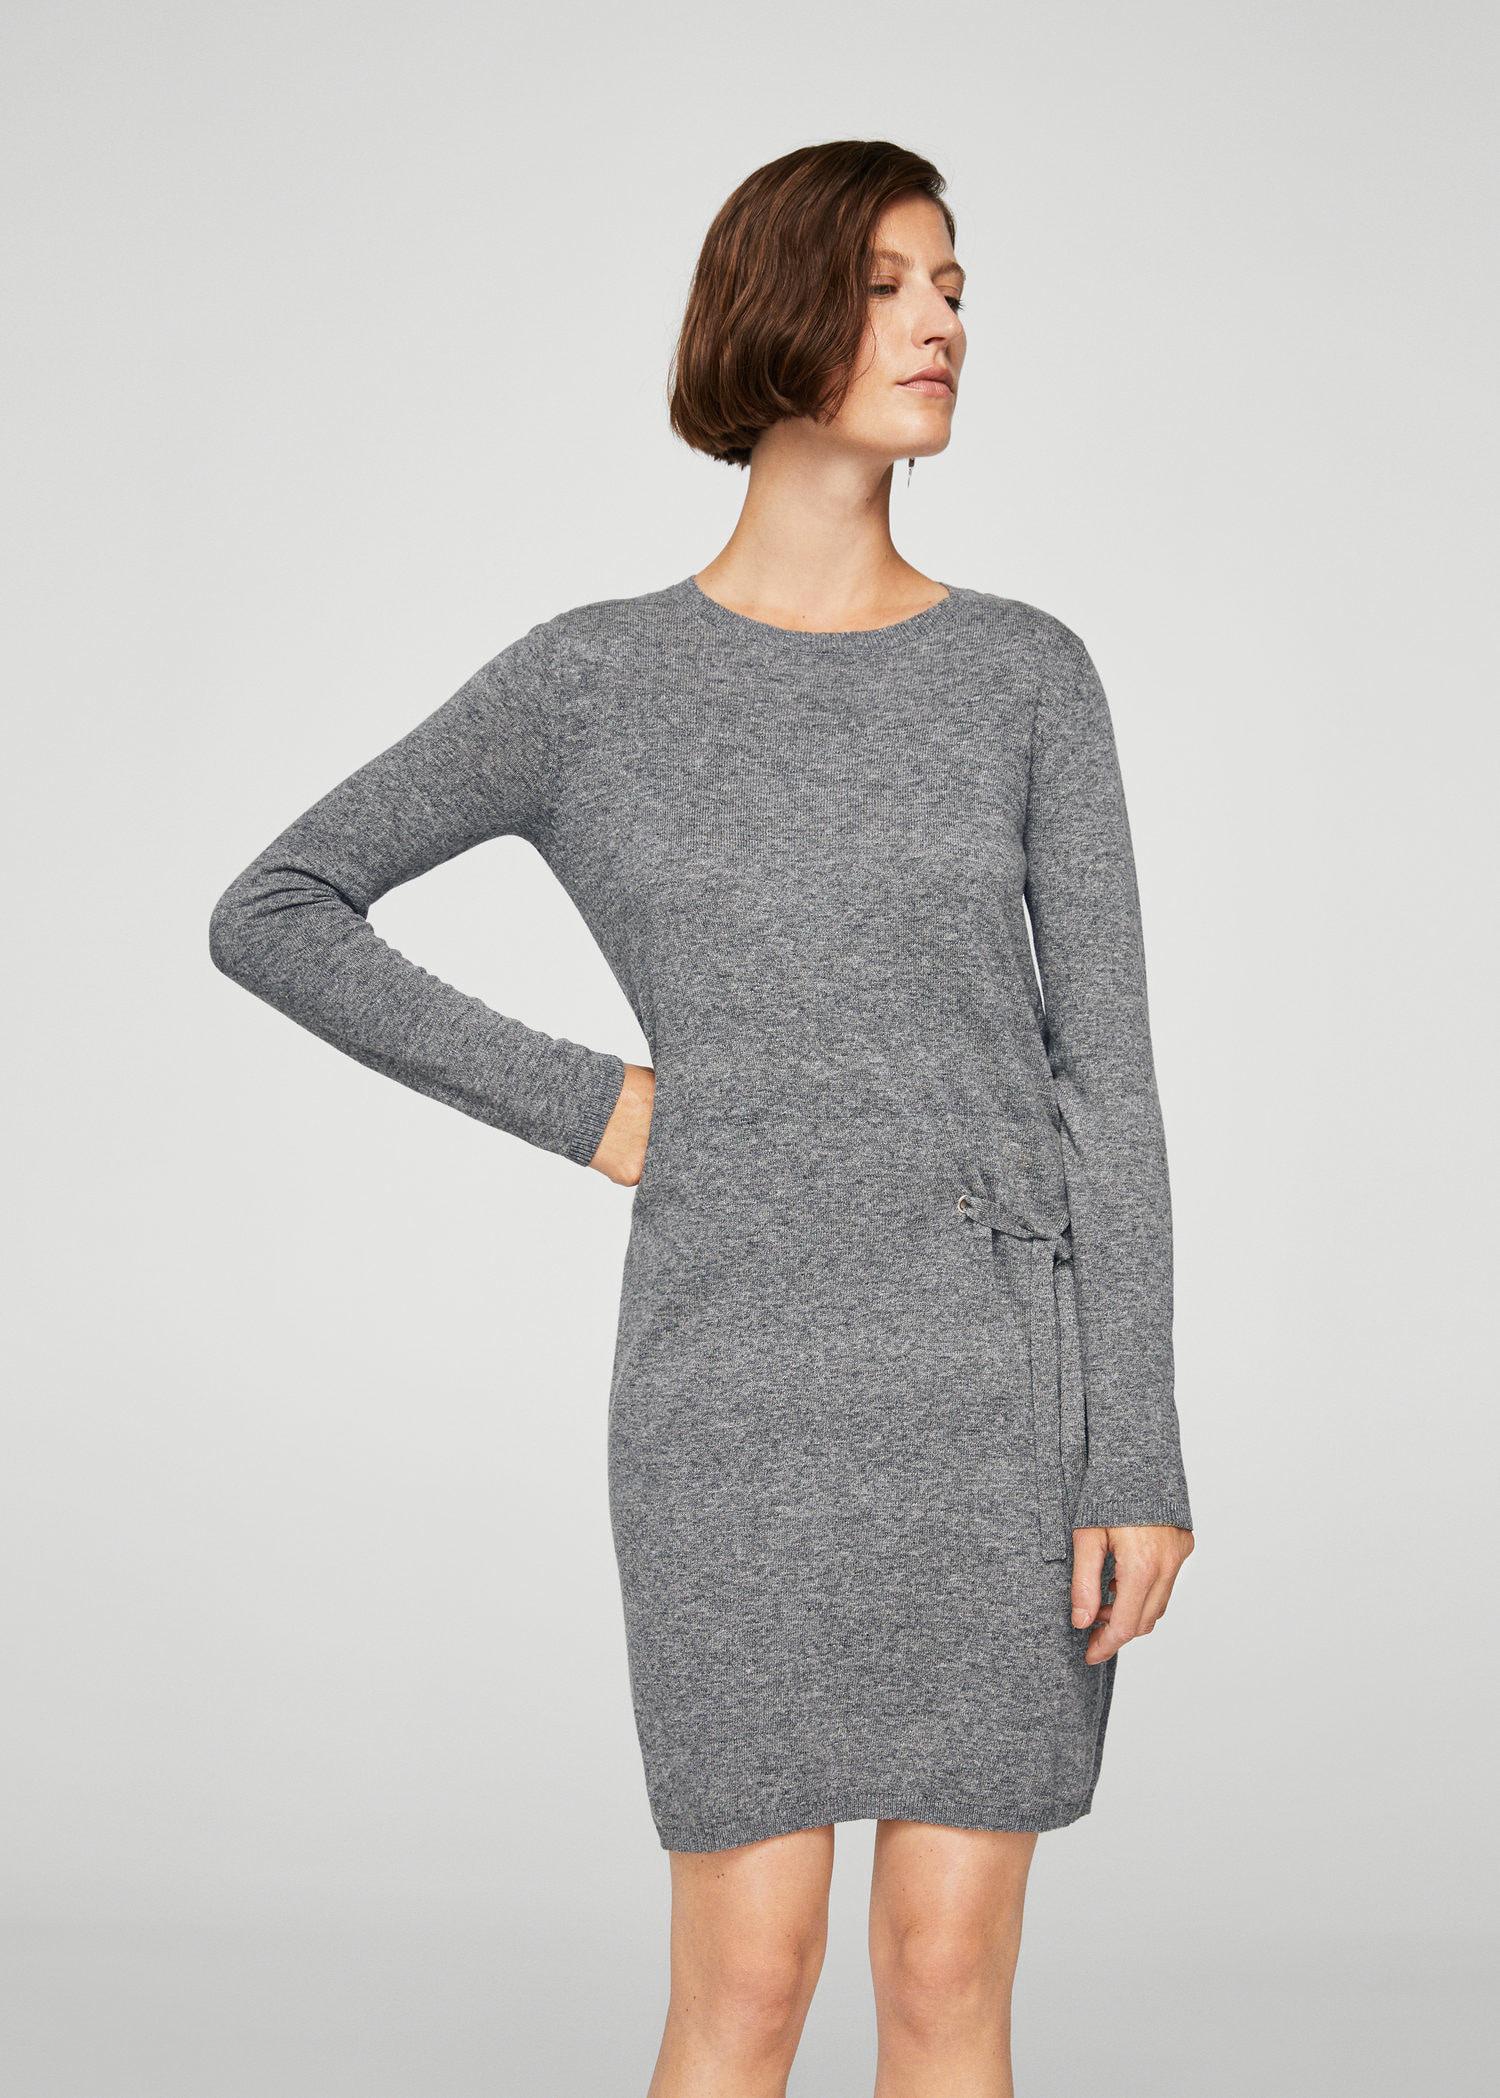 Lyst - Mango Knot Knitted Dress in Gray